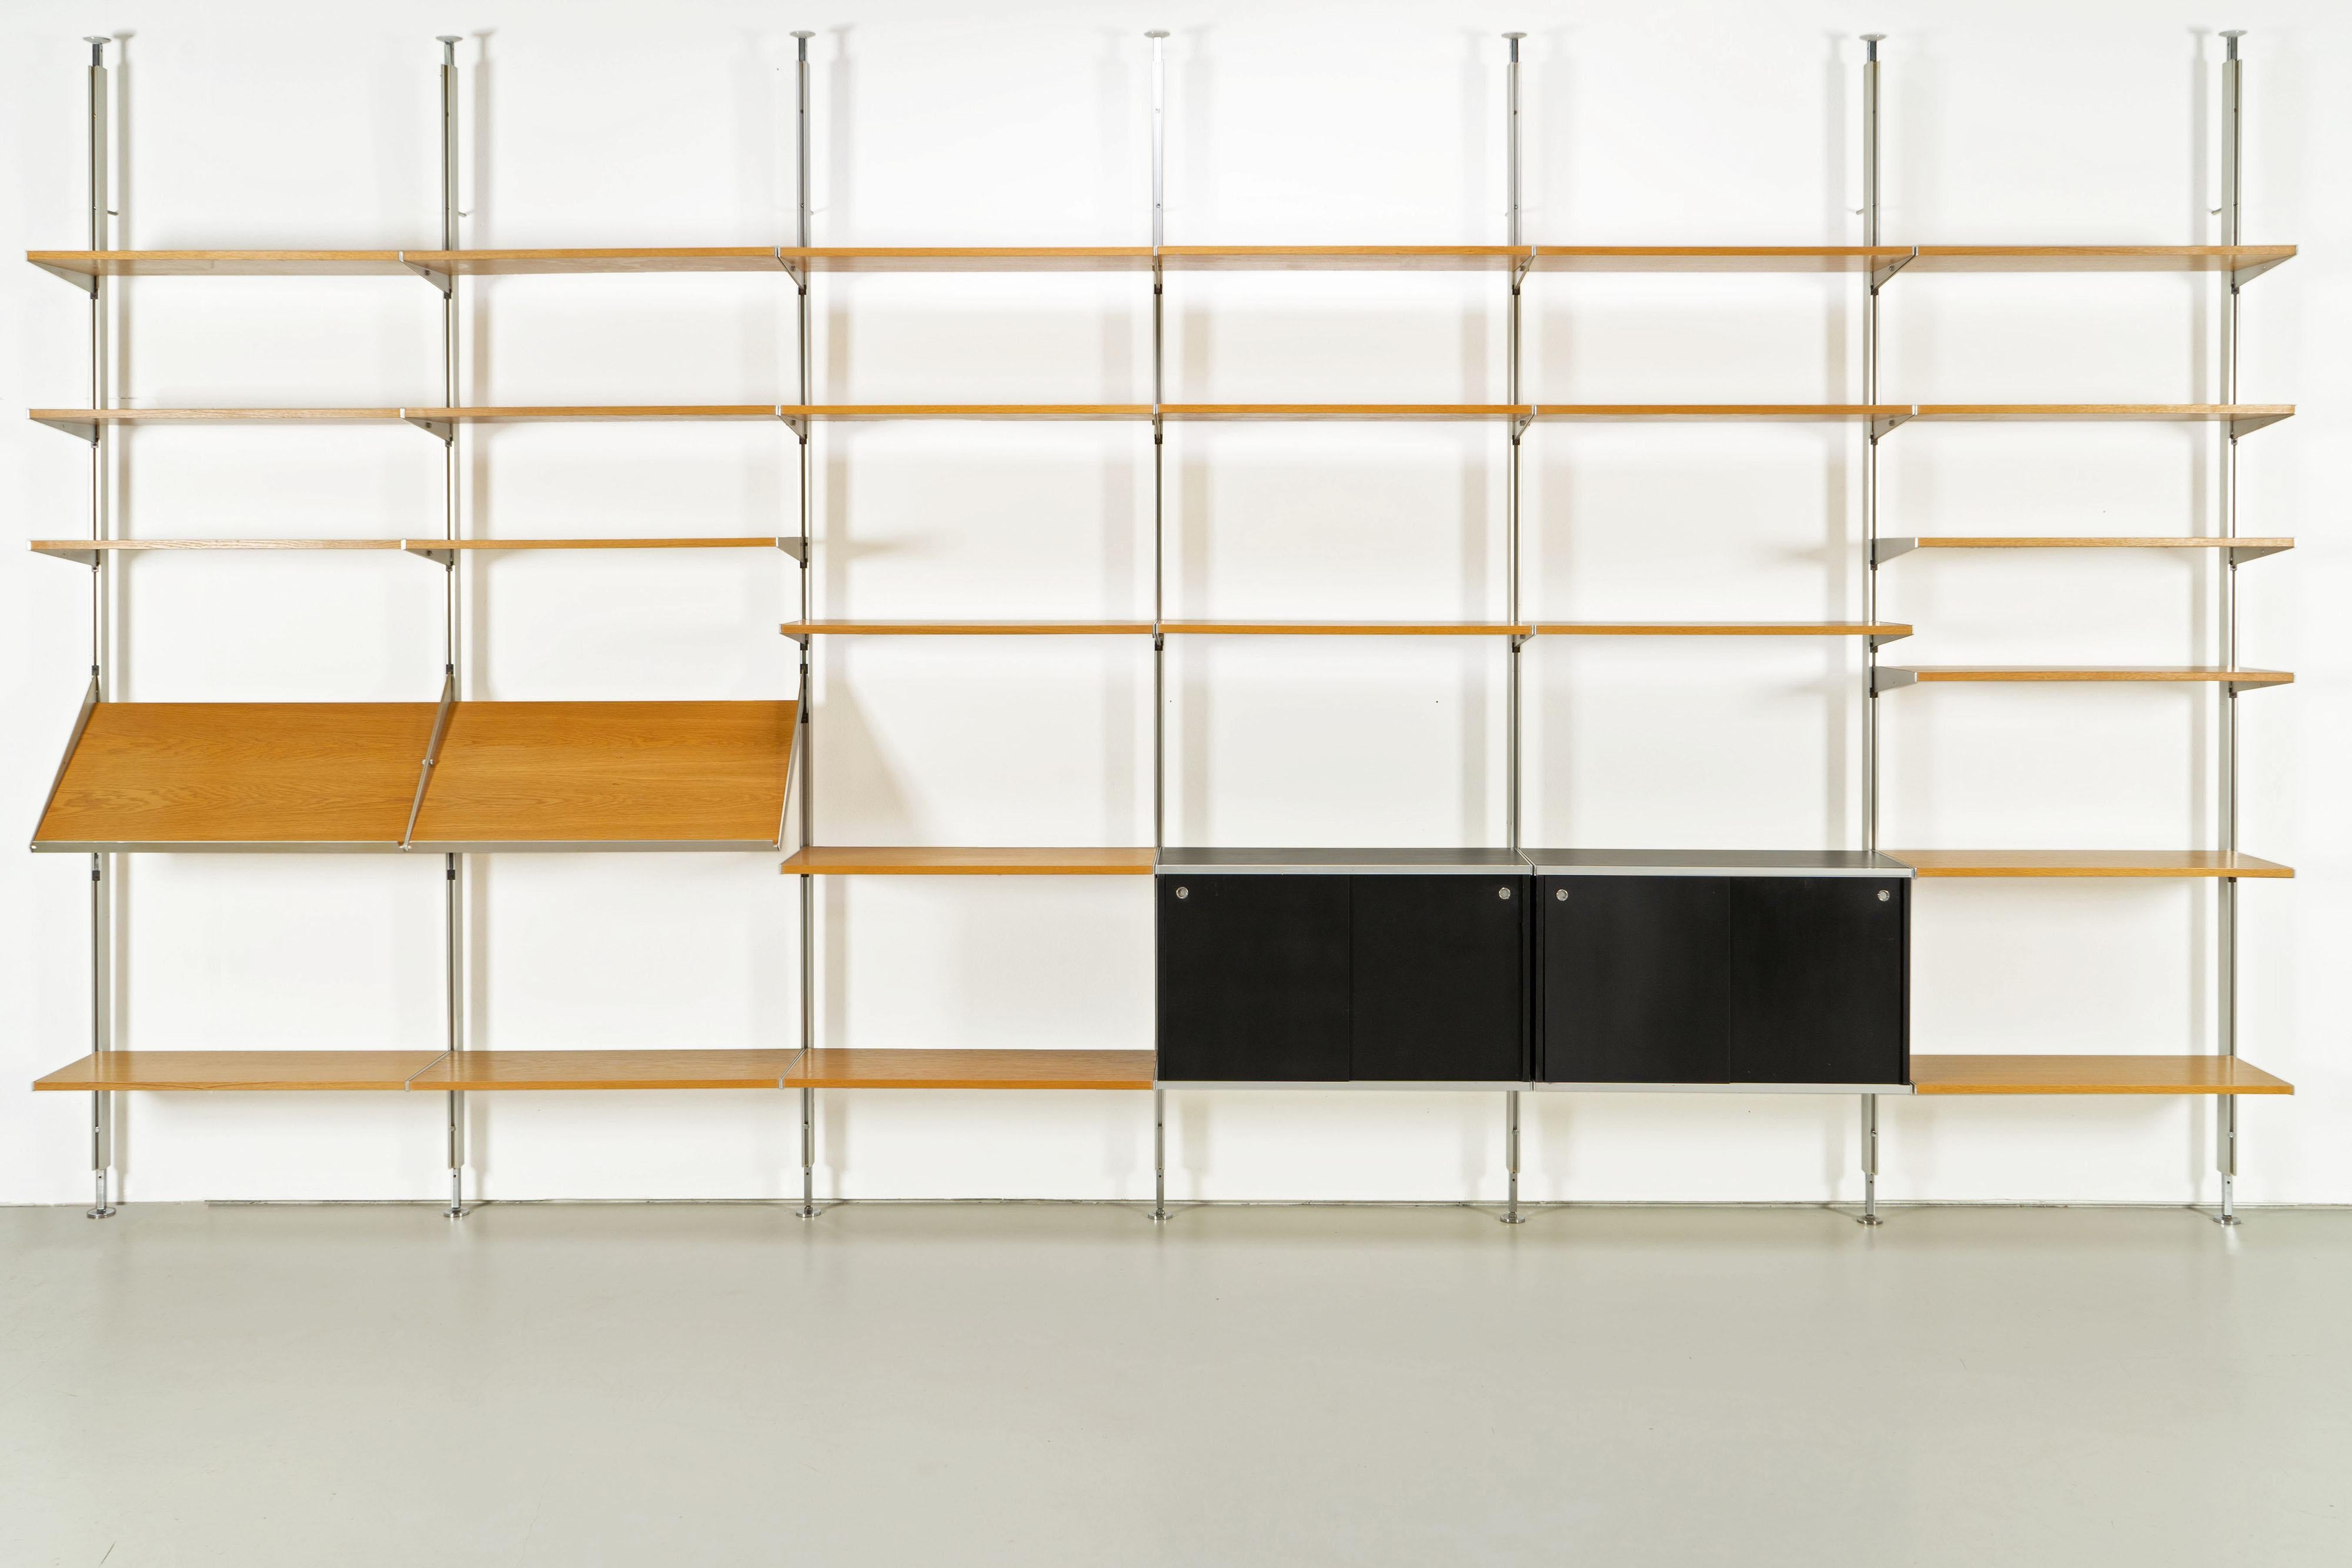 Very large shelf by George Nelson, produced by Herman Miller. The shelf can be mount between floor and ceiling and used as a room divider. The elements can be installed on either side of the poles. Excellent condition.

Dimensions: 39 x 527.5 x